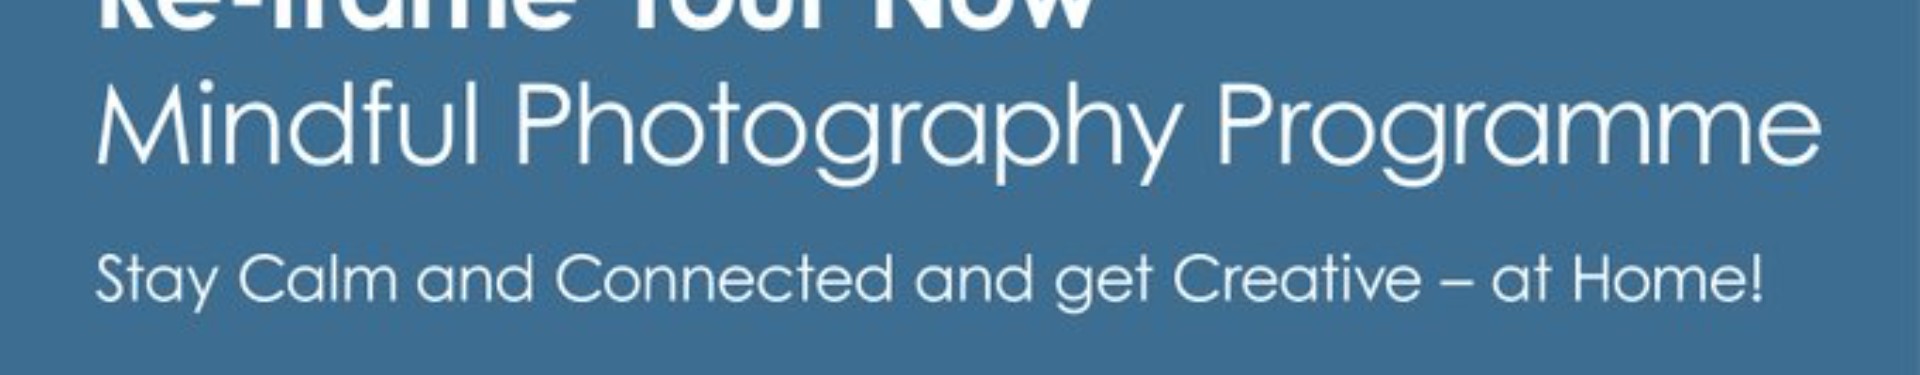 mindful photography banner